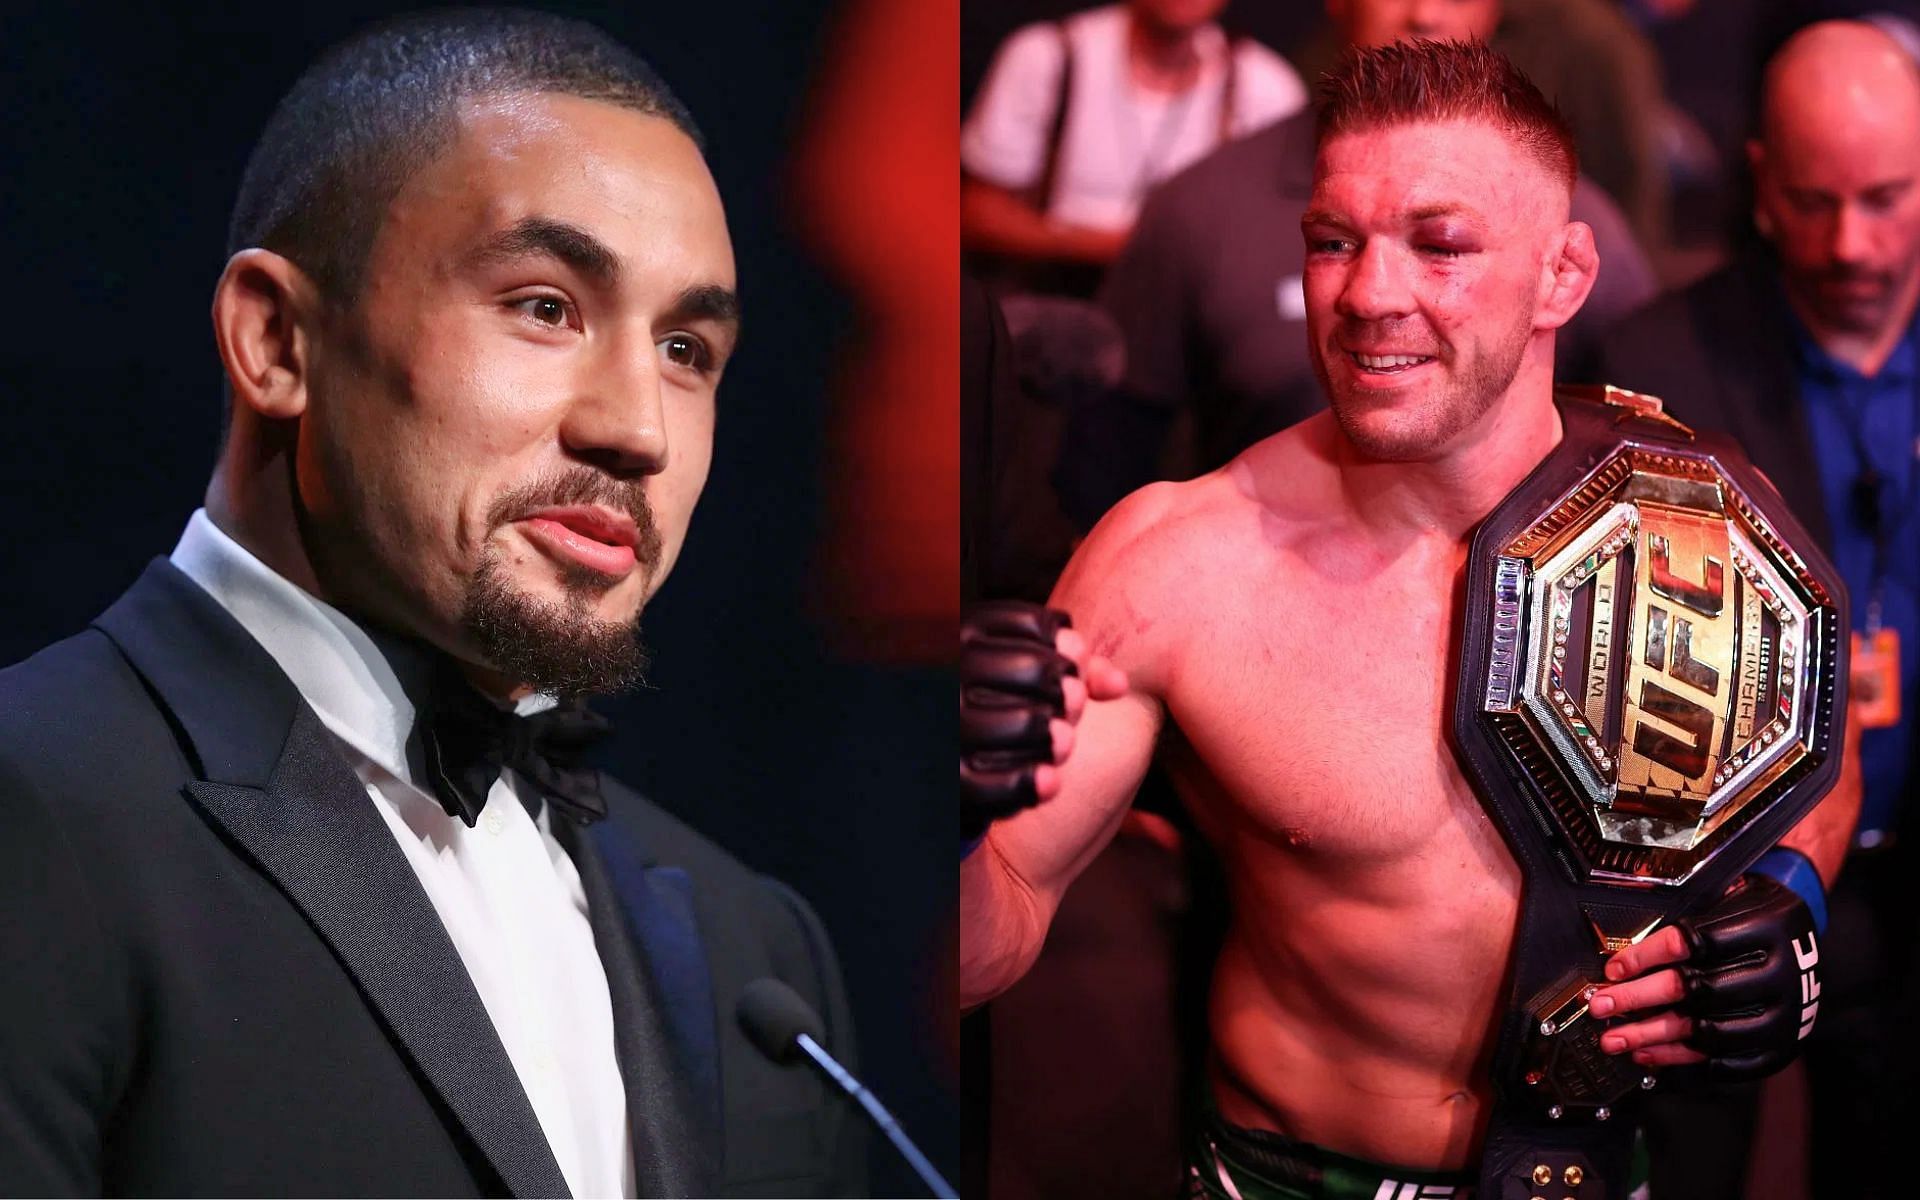 Robert Whittaker (left) believes he underestimated Dricus du Plessis (right) when they fought at UFC 290 [Images Courtesy: @GettyImages]